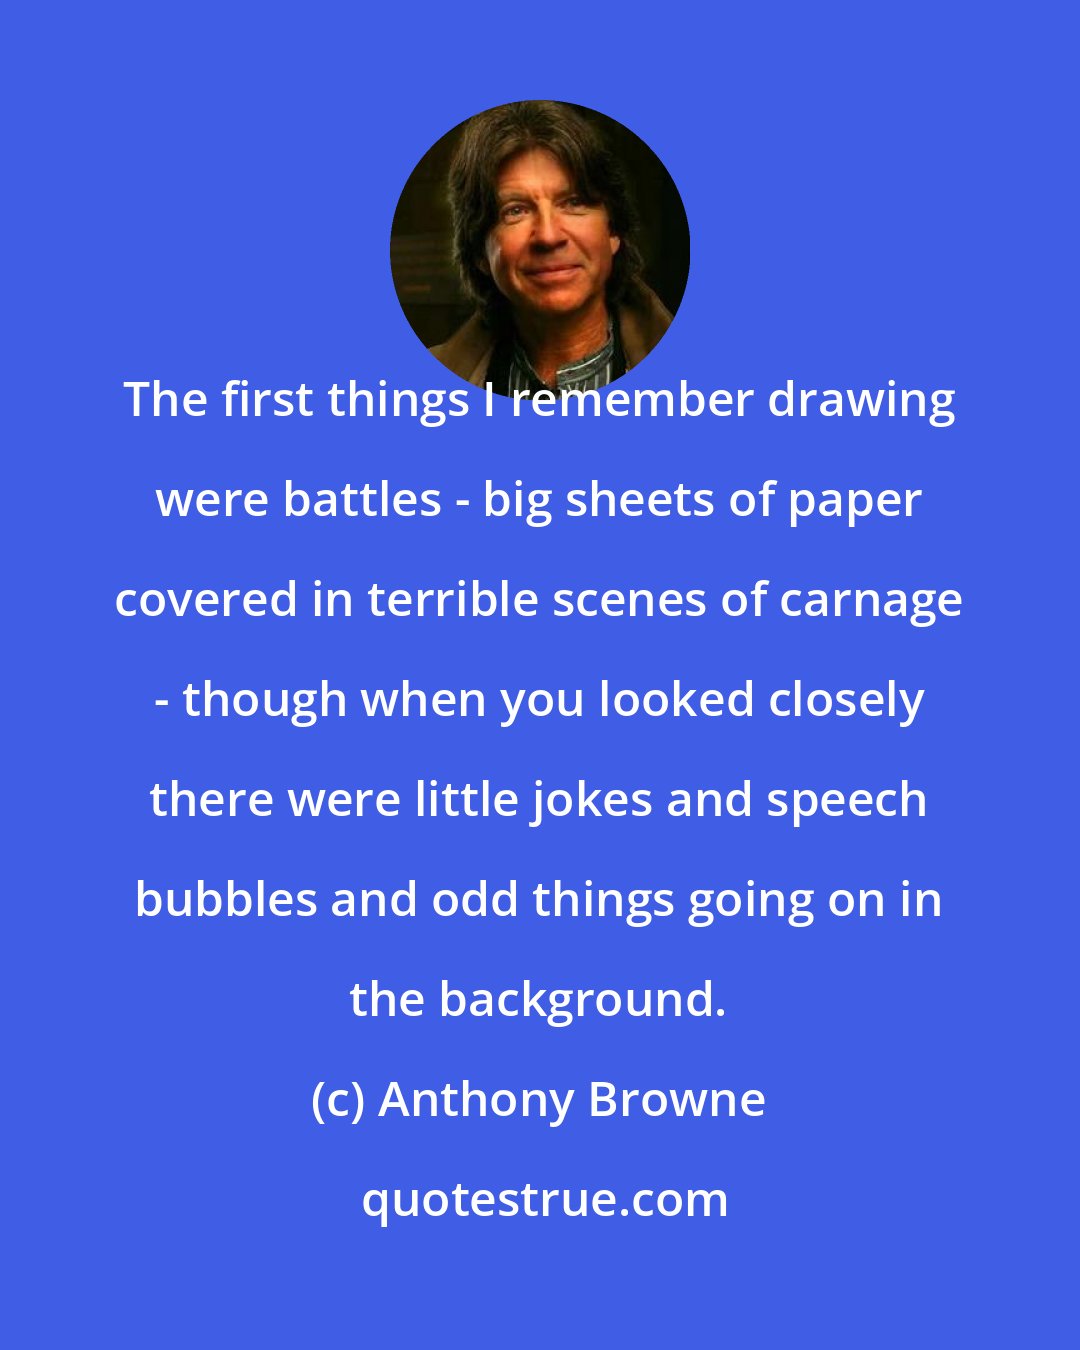 Anthony Browne: The first things I remember drawing were battles - big sheets of paper covered in terrible scenes of carnage - though when you looked closely there were little jokes and speech bubbles and odd things going on in the background.